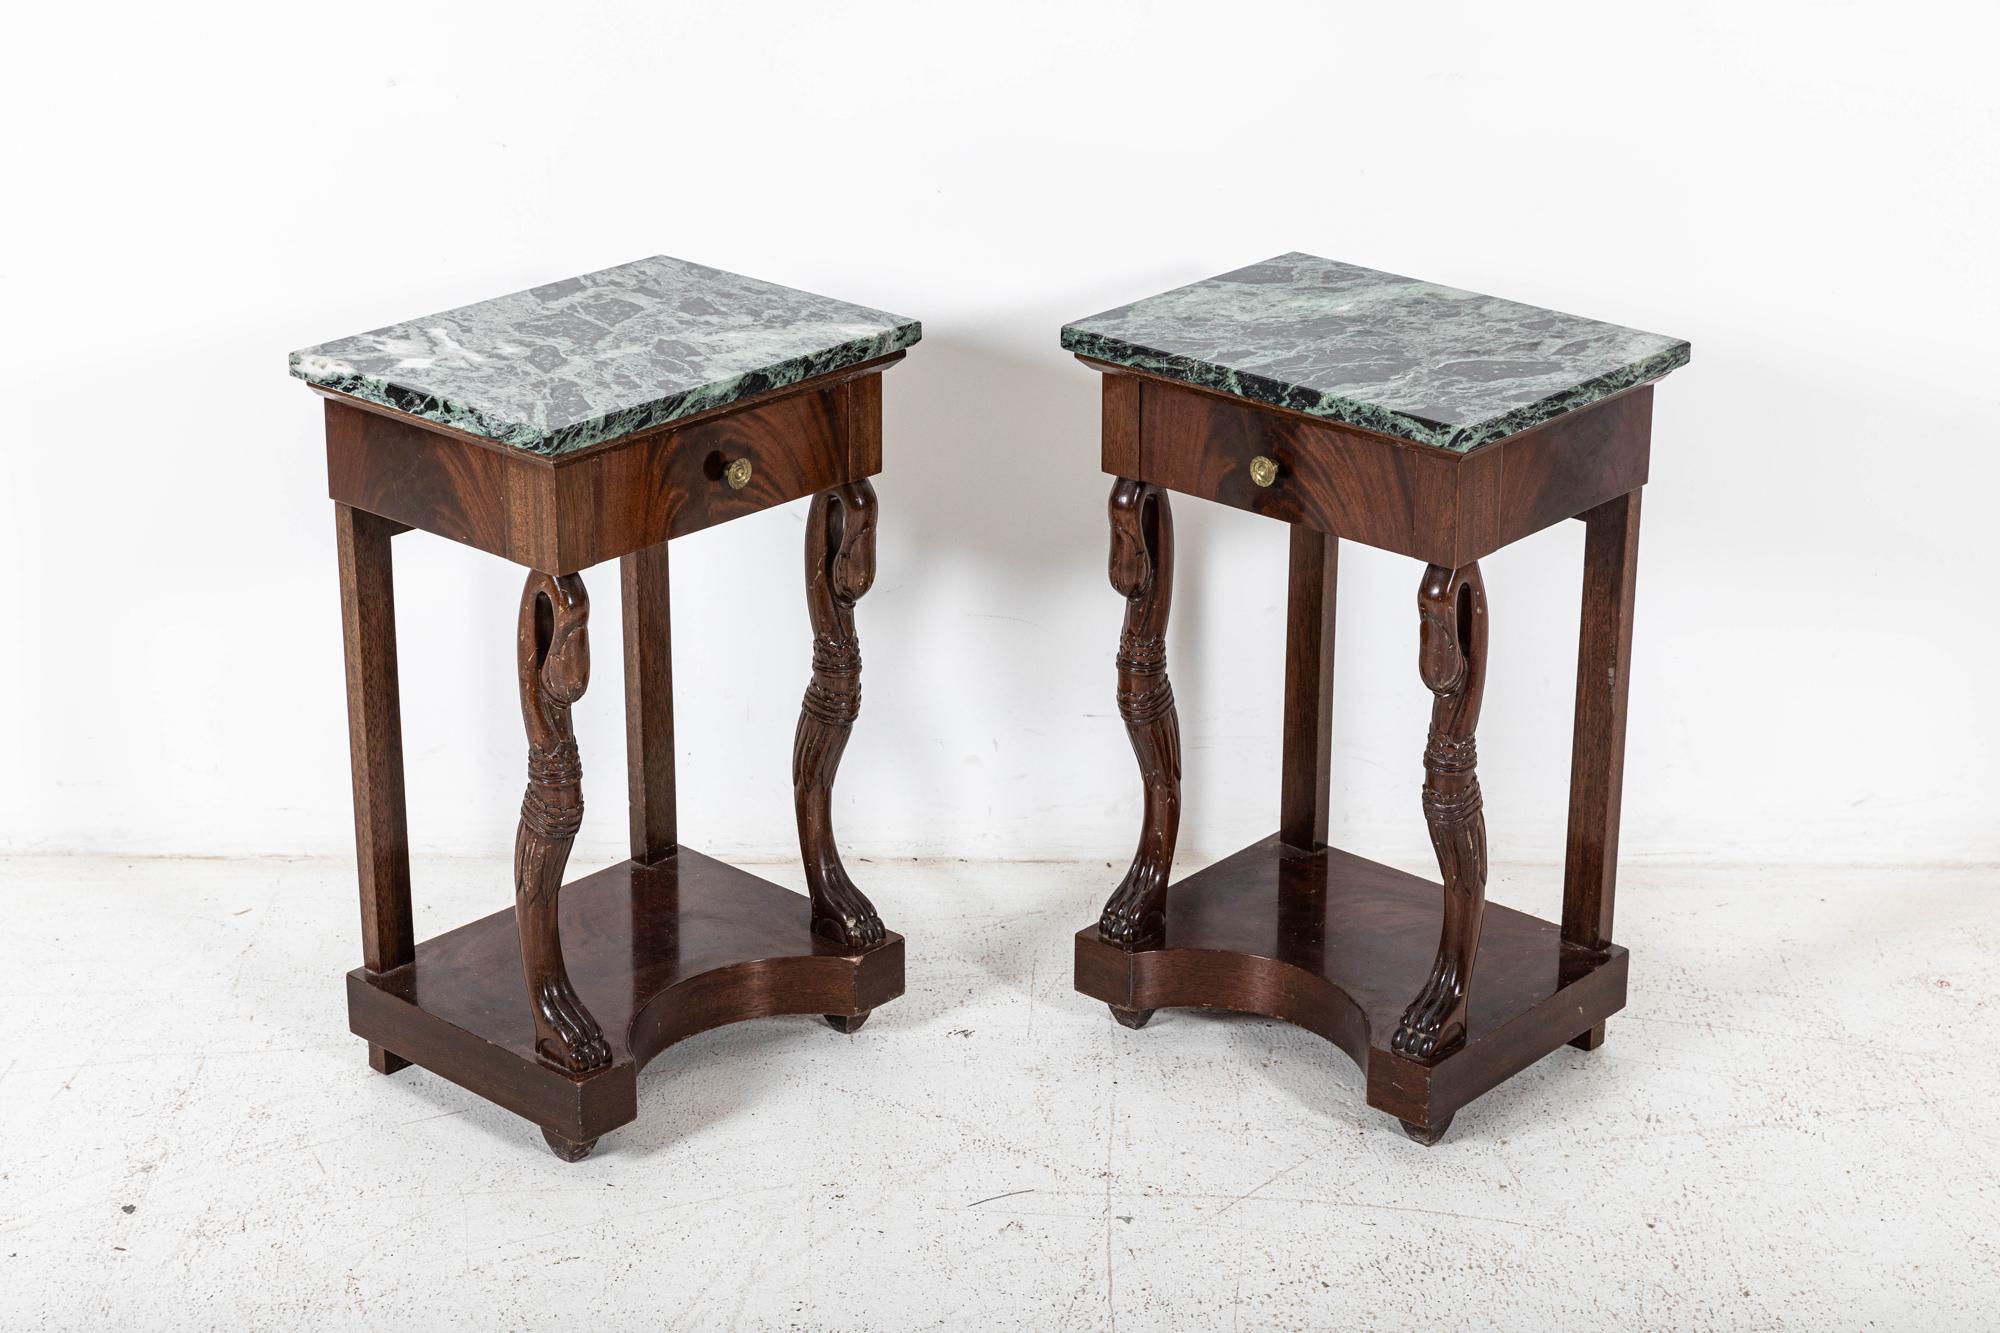 Circa 1900

Pair French mahogany and oak swan neck bedside cabinets with marble tops and paw feet

Excellent quality.



Measures: W41 x D31 x H65 cm.